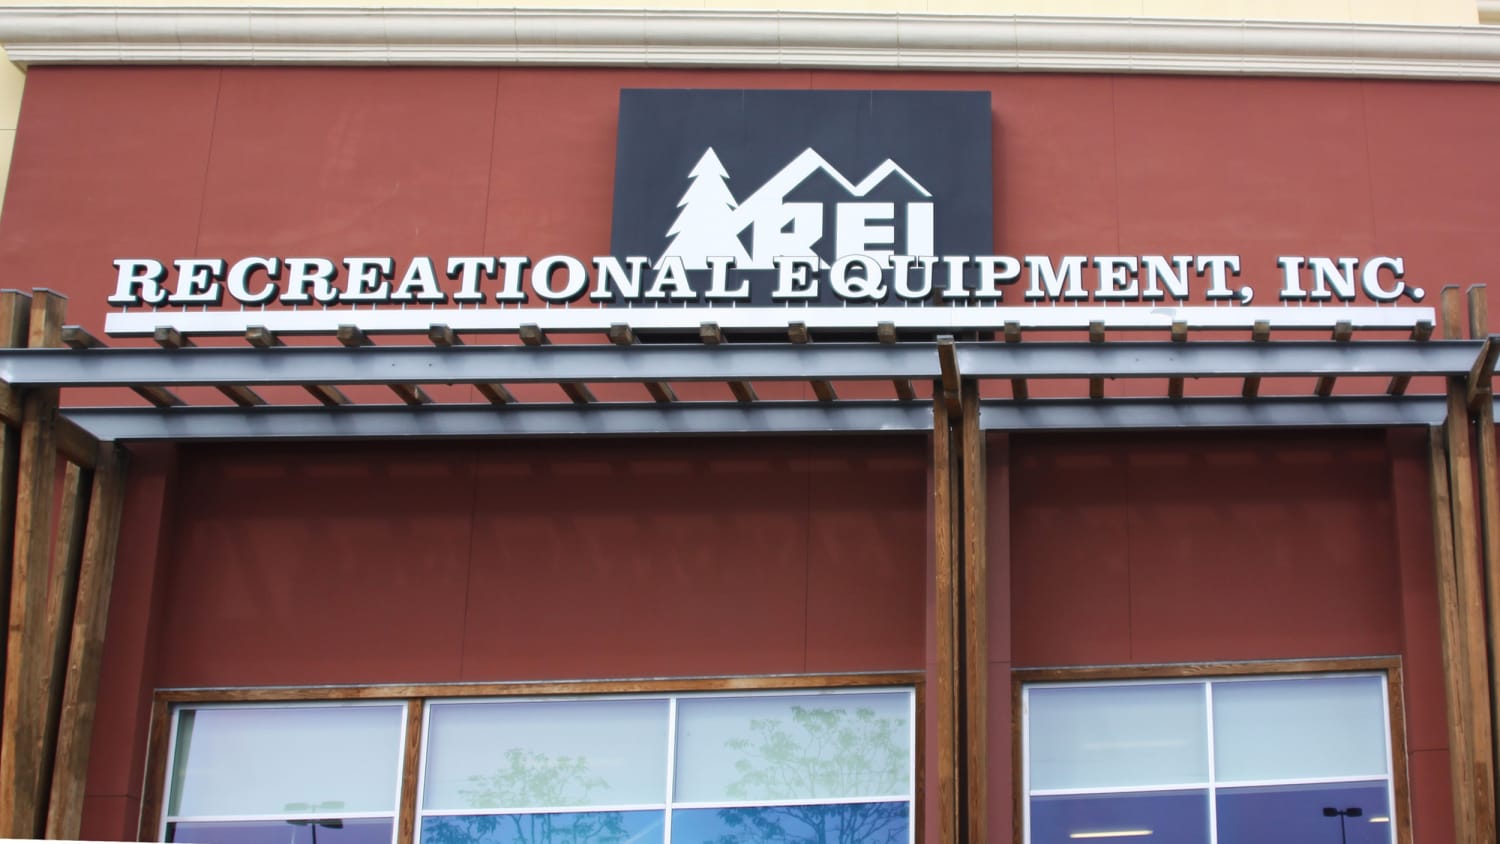 Outdoor Gear Retailer Rei To Close Doors On Black Friday For The First Time